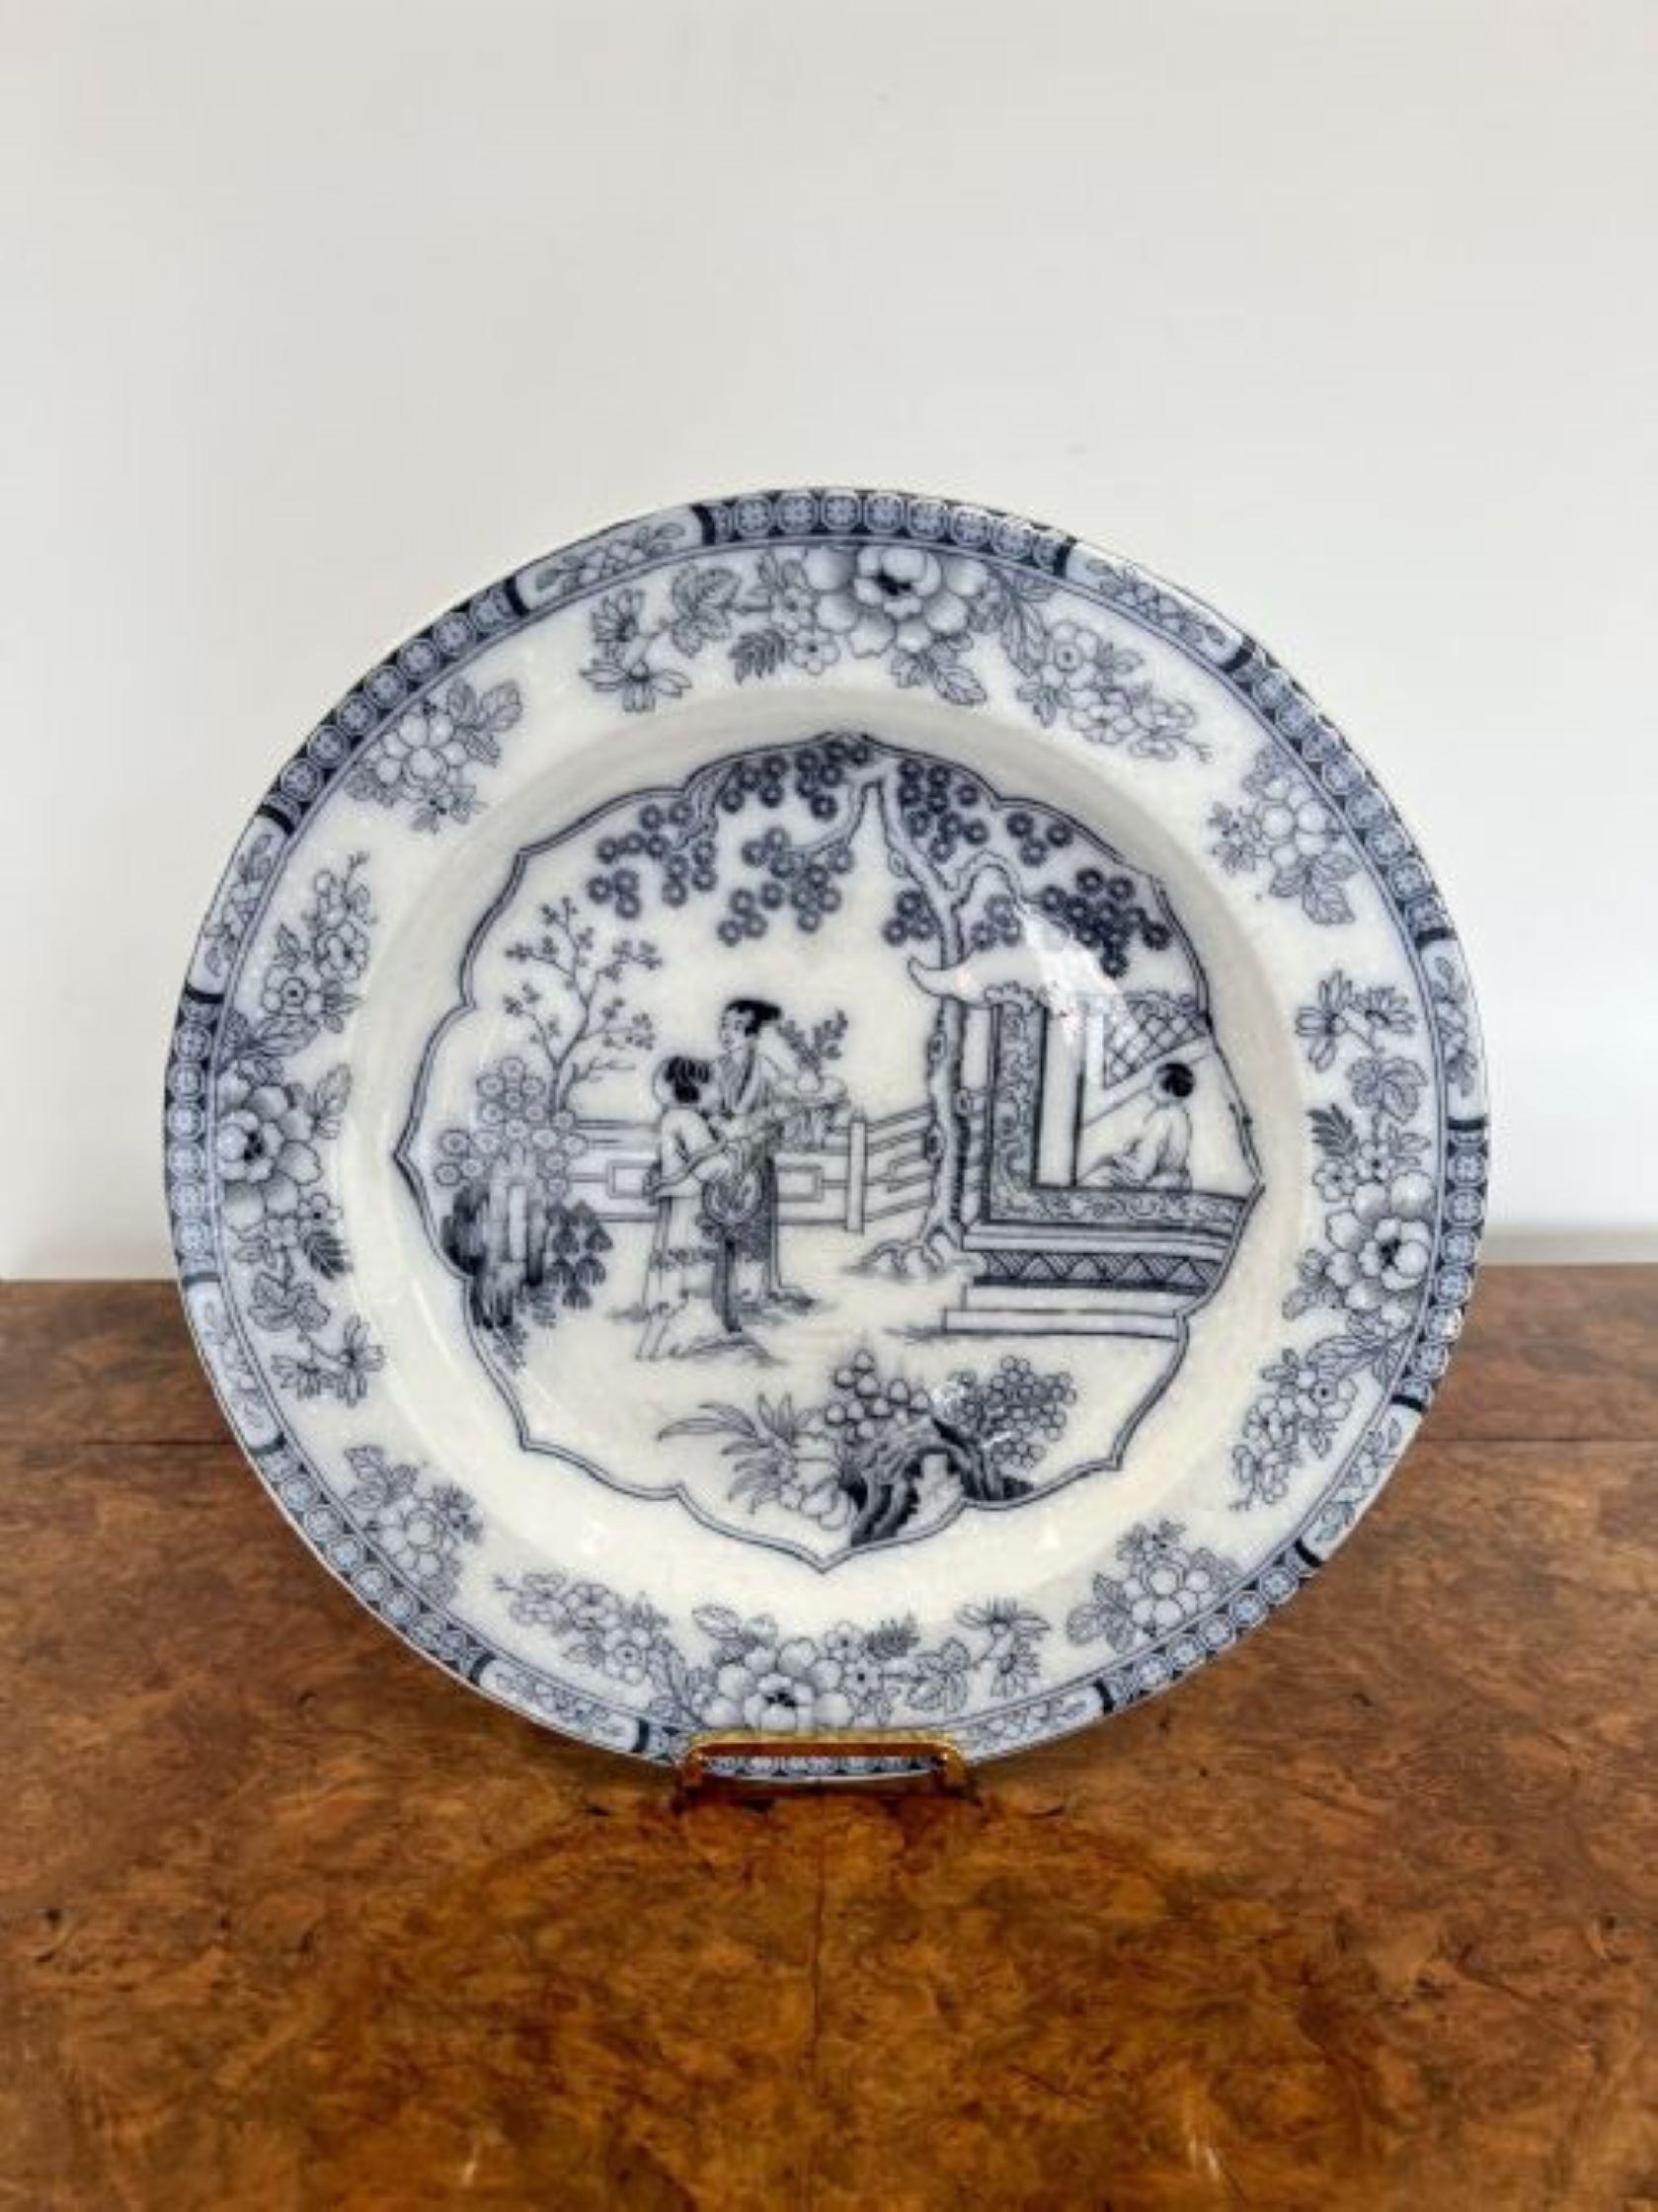 Quality pair of antique Victorian blue and white plates having a quality pair of antique Victorian chargers in Chinese style decorated with traditional scenes with willow trees, flowers and patterns. 